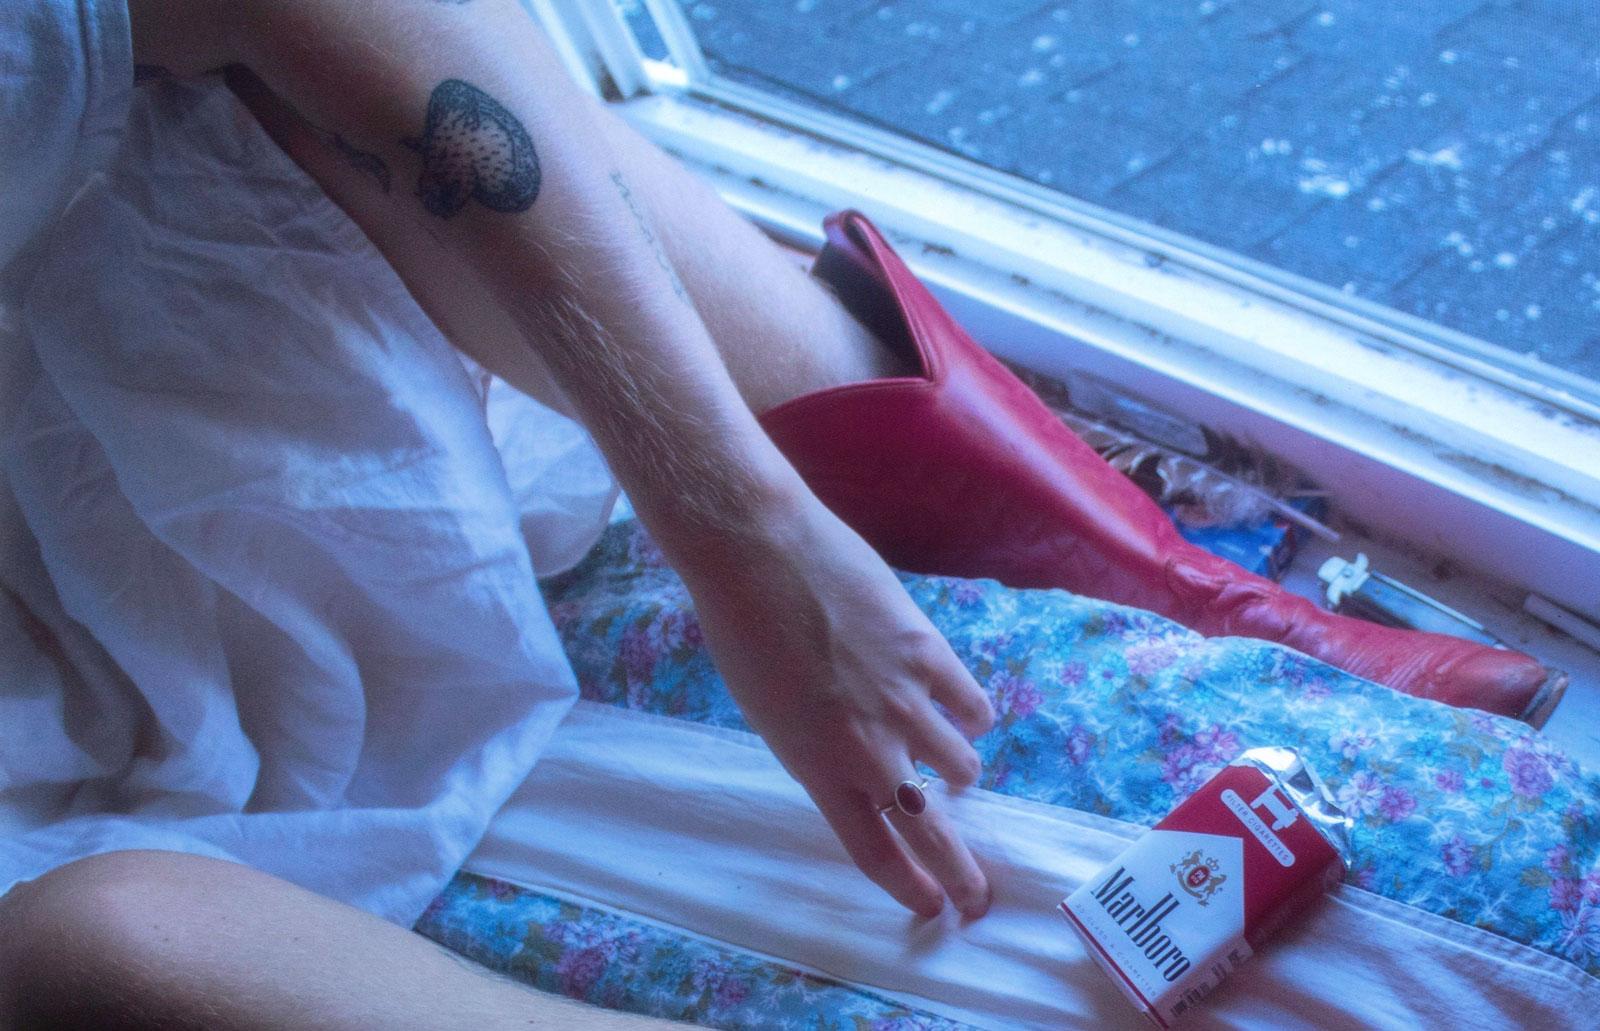 Marlboro Out the Window (These Boots are made for walking) - Photograph by Brinley Ribando